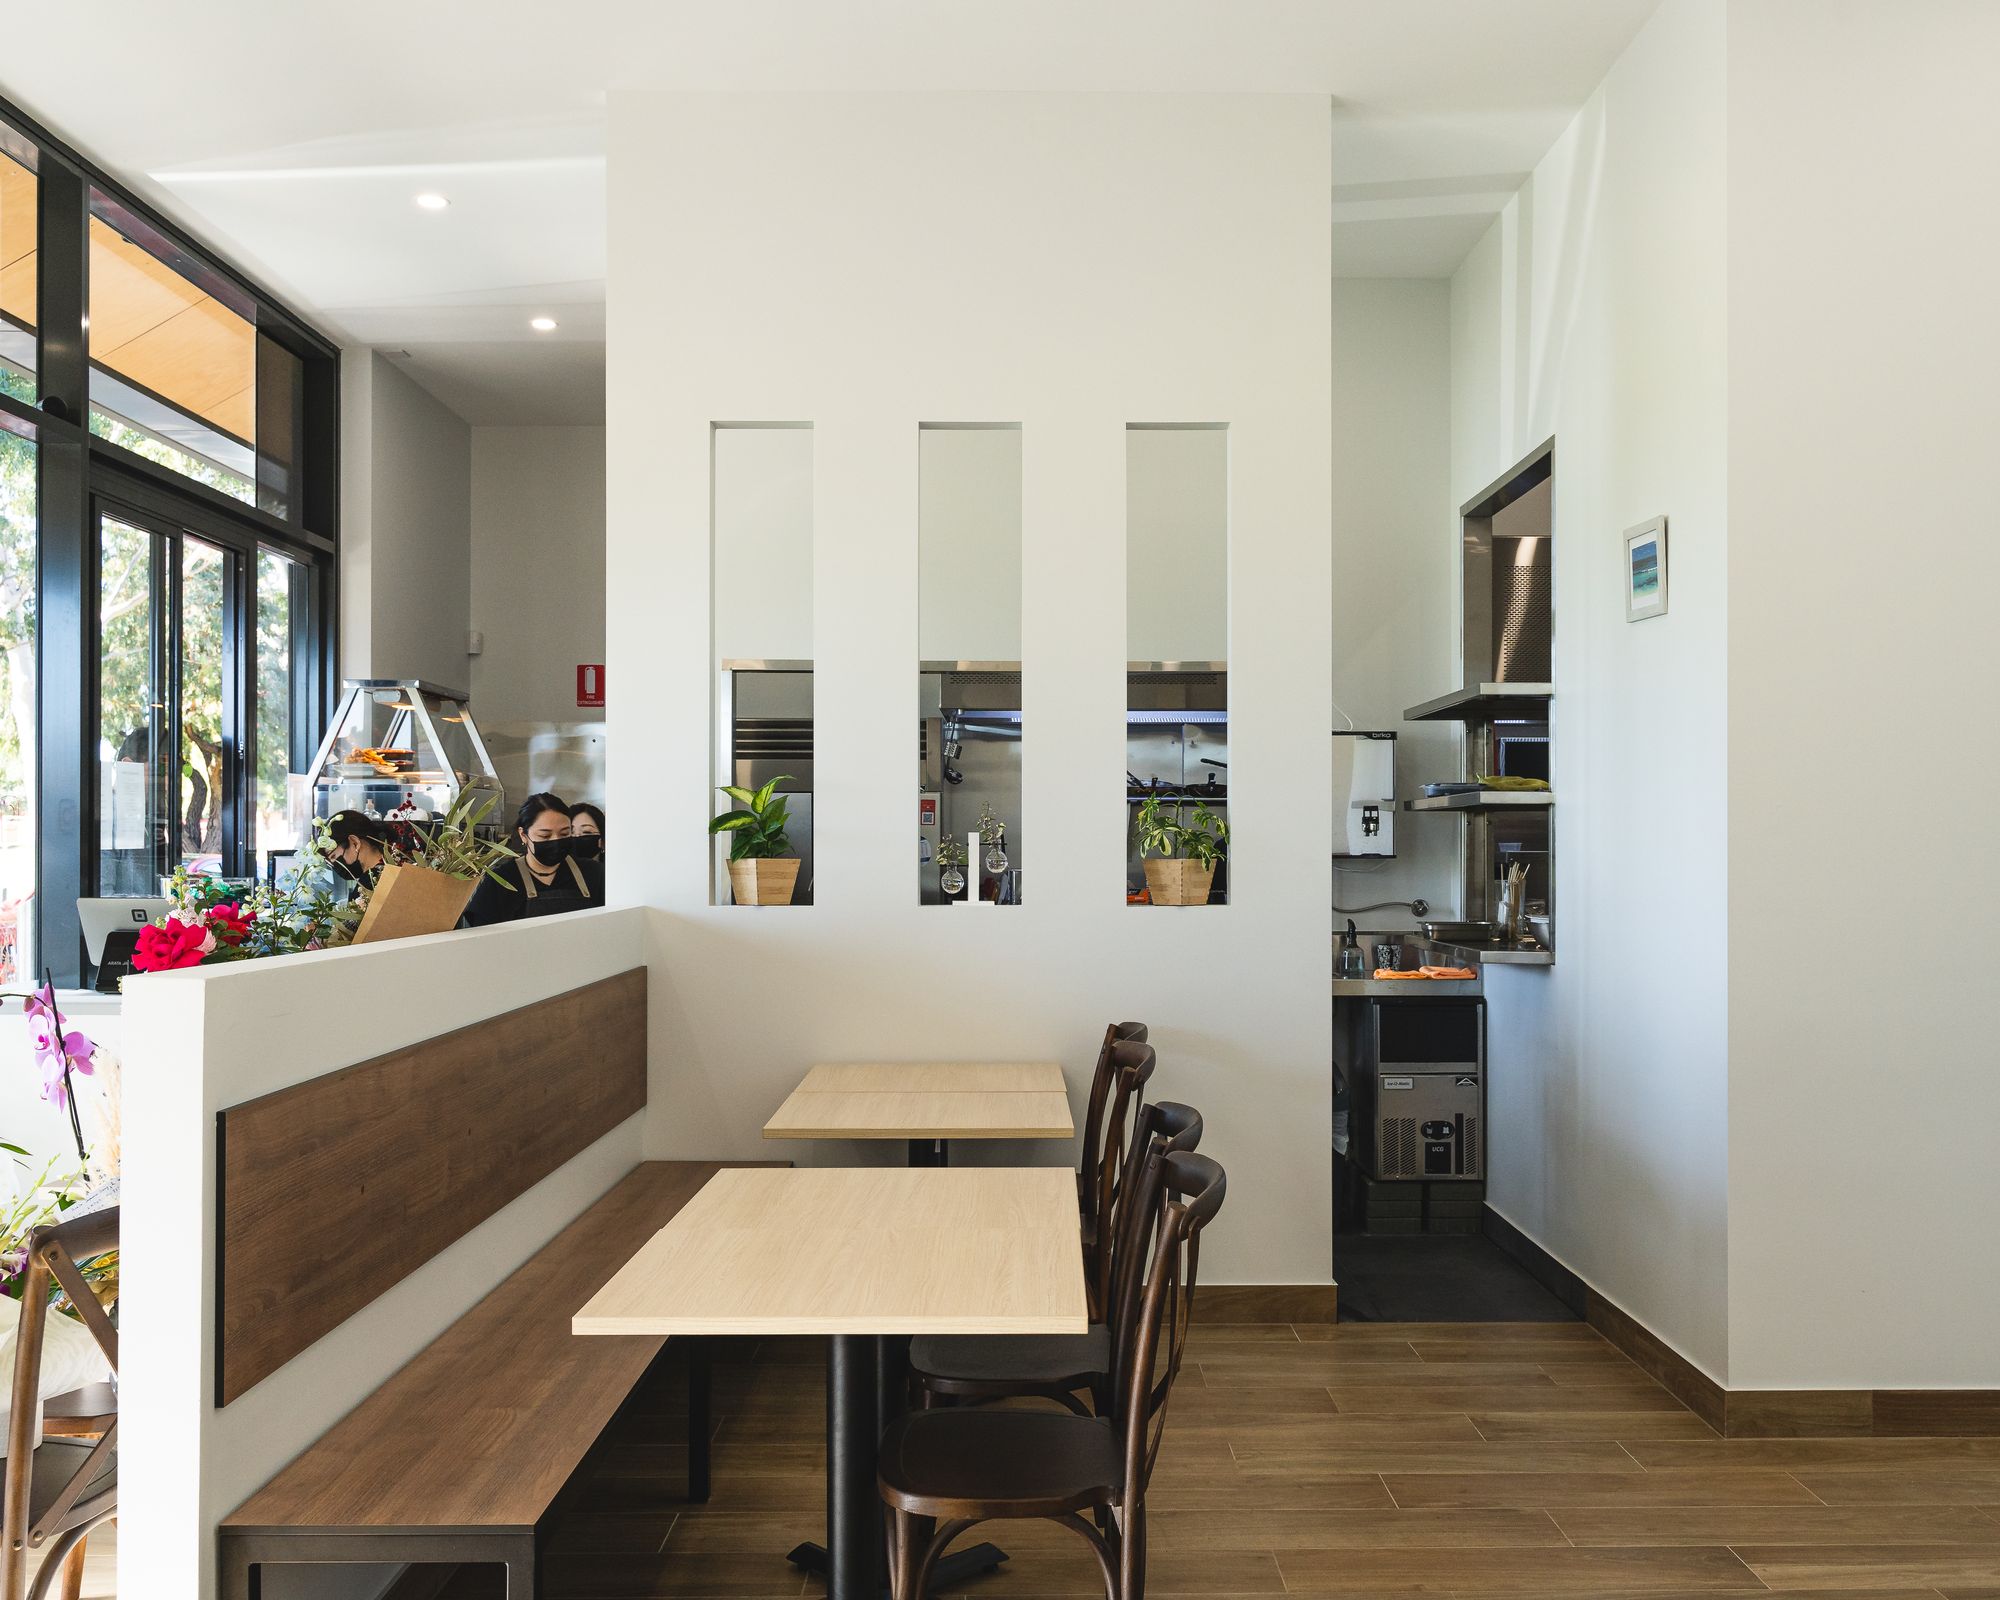 Interior of Arata Japanese Dining showing the open concept kitchen and dining chairs